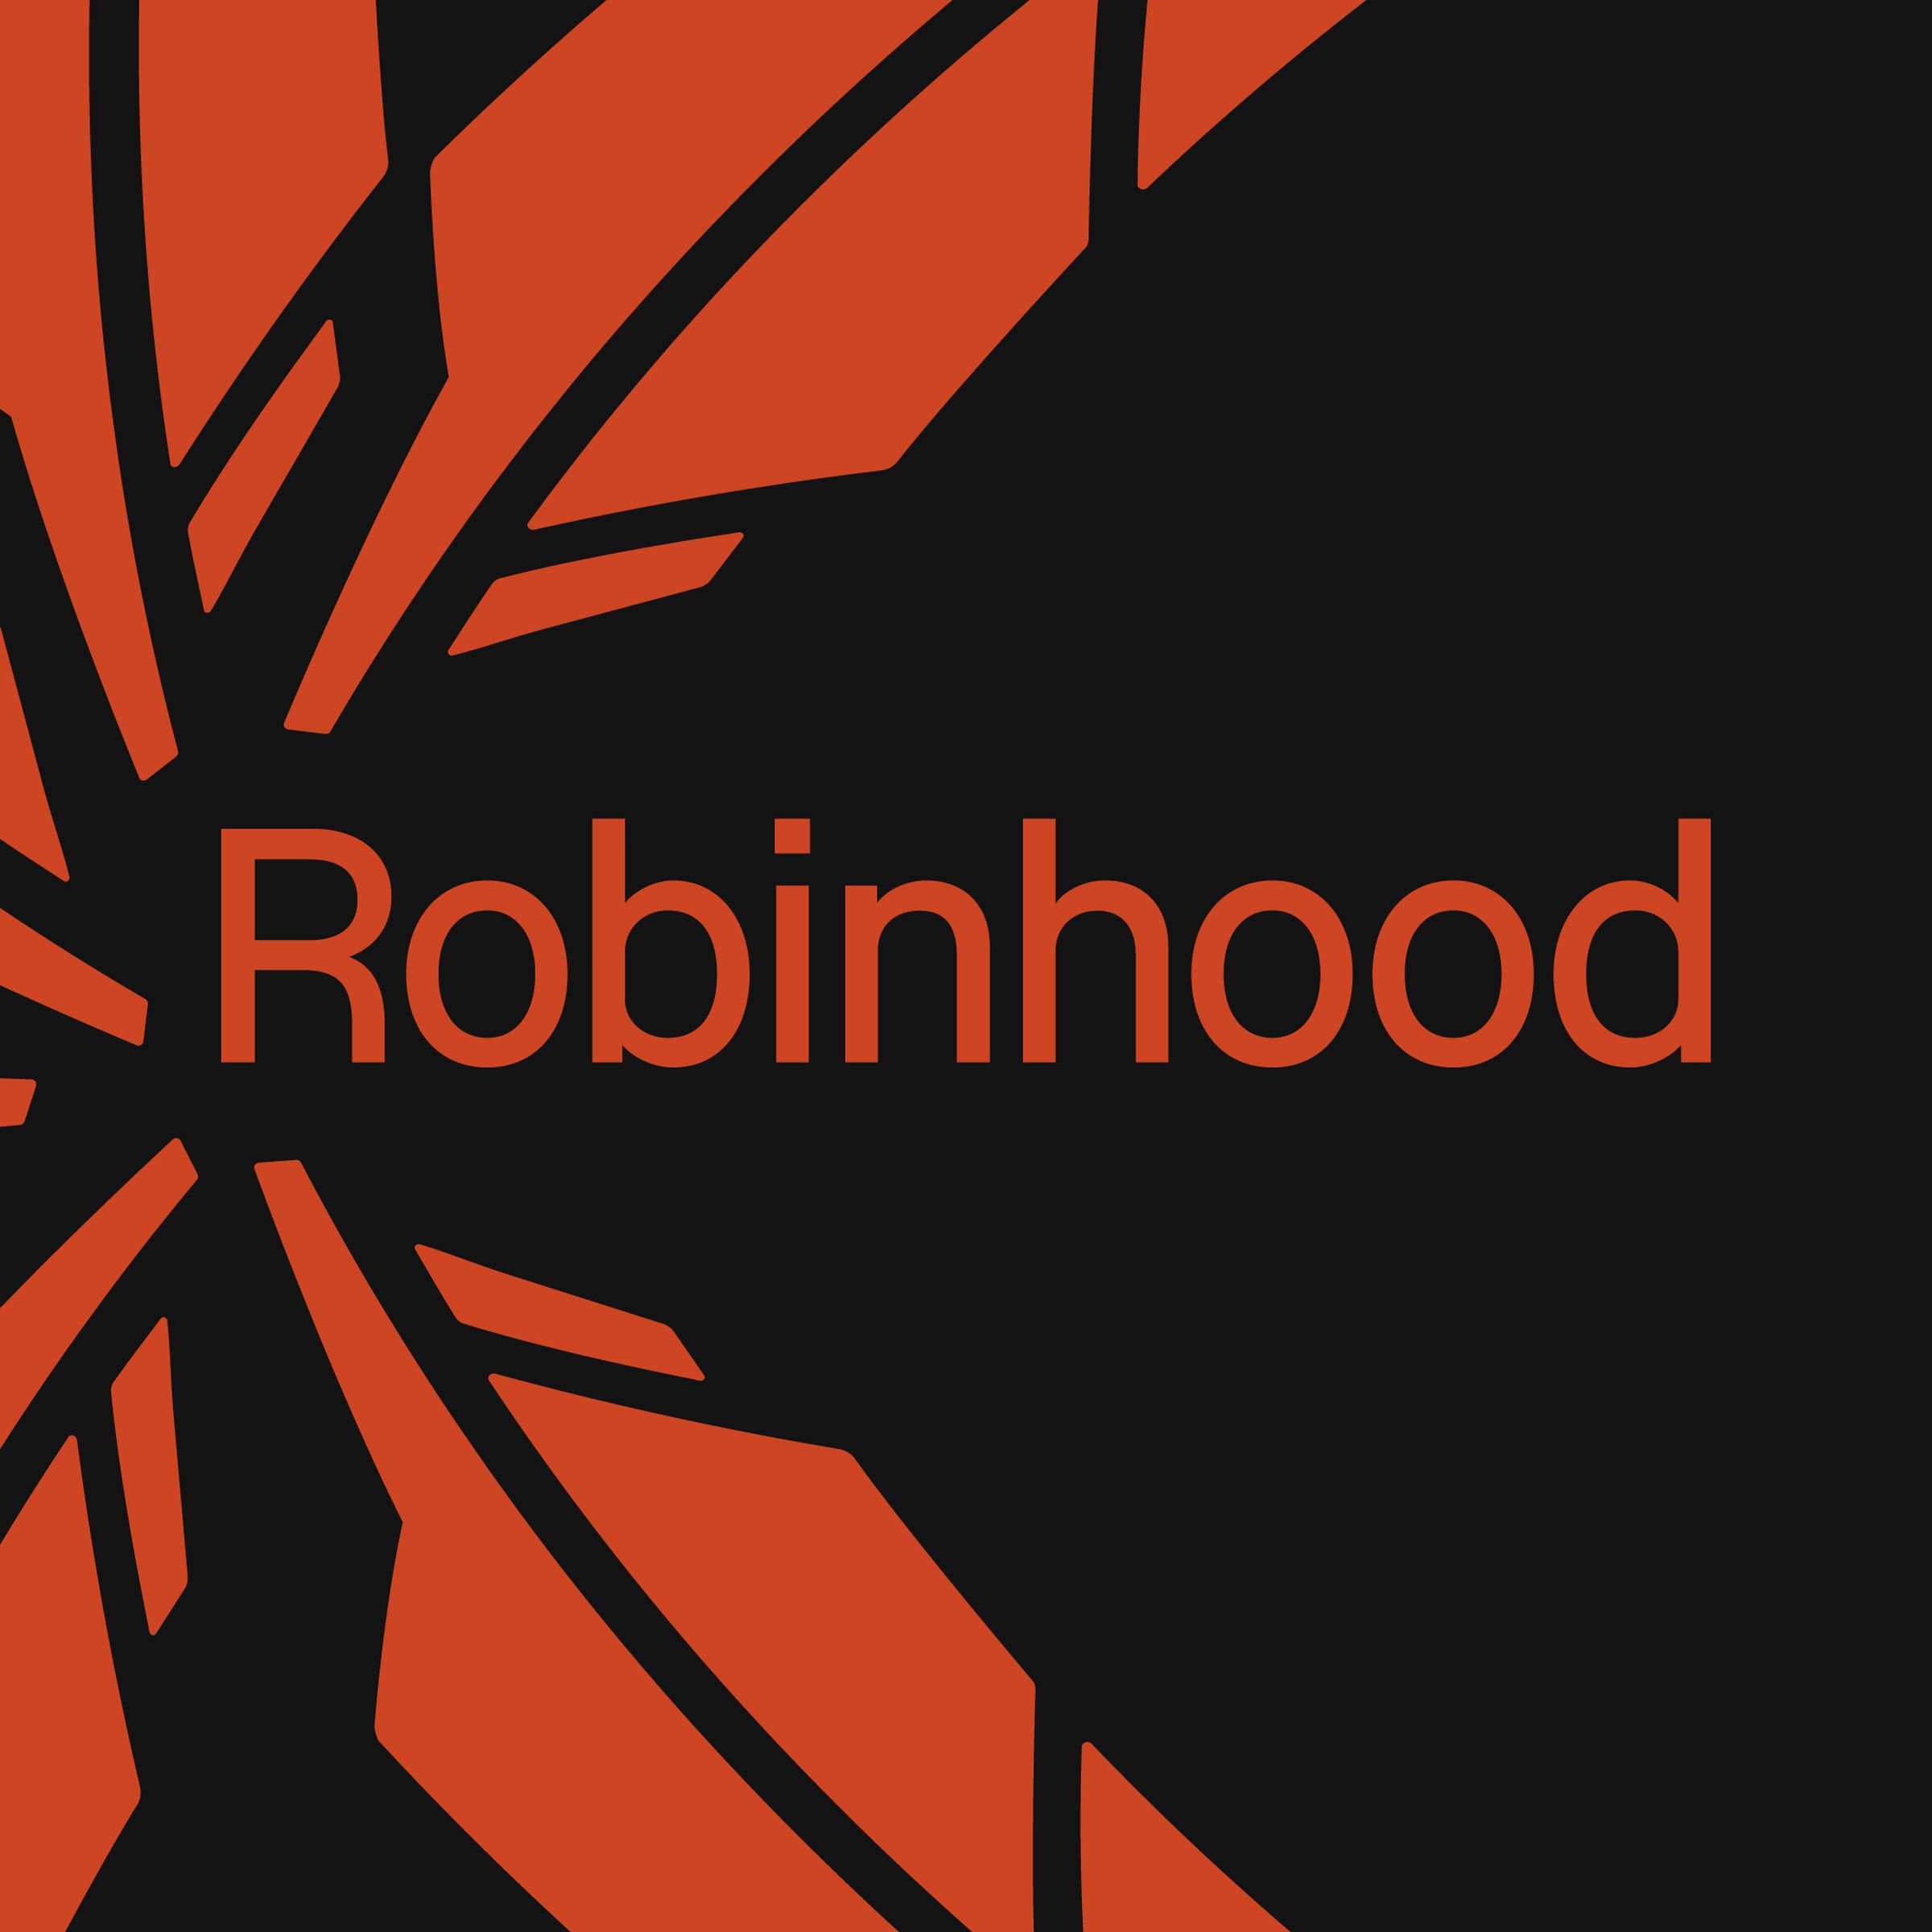 An image showing the Robinhood logo on a red and black background